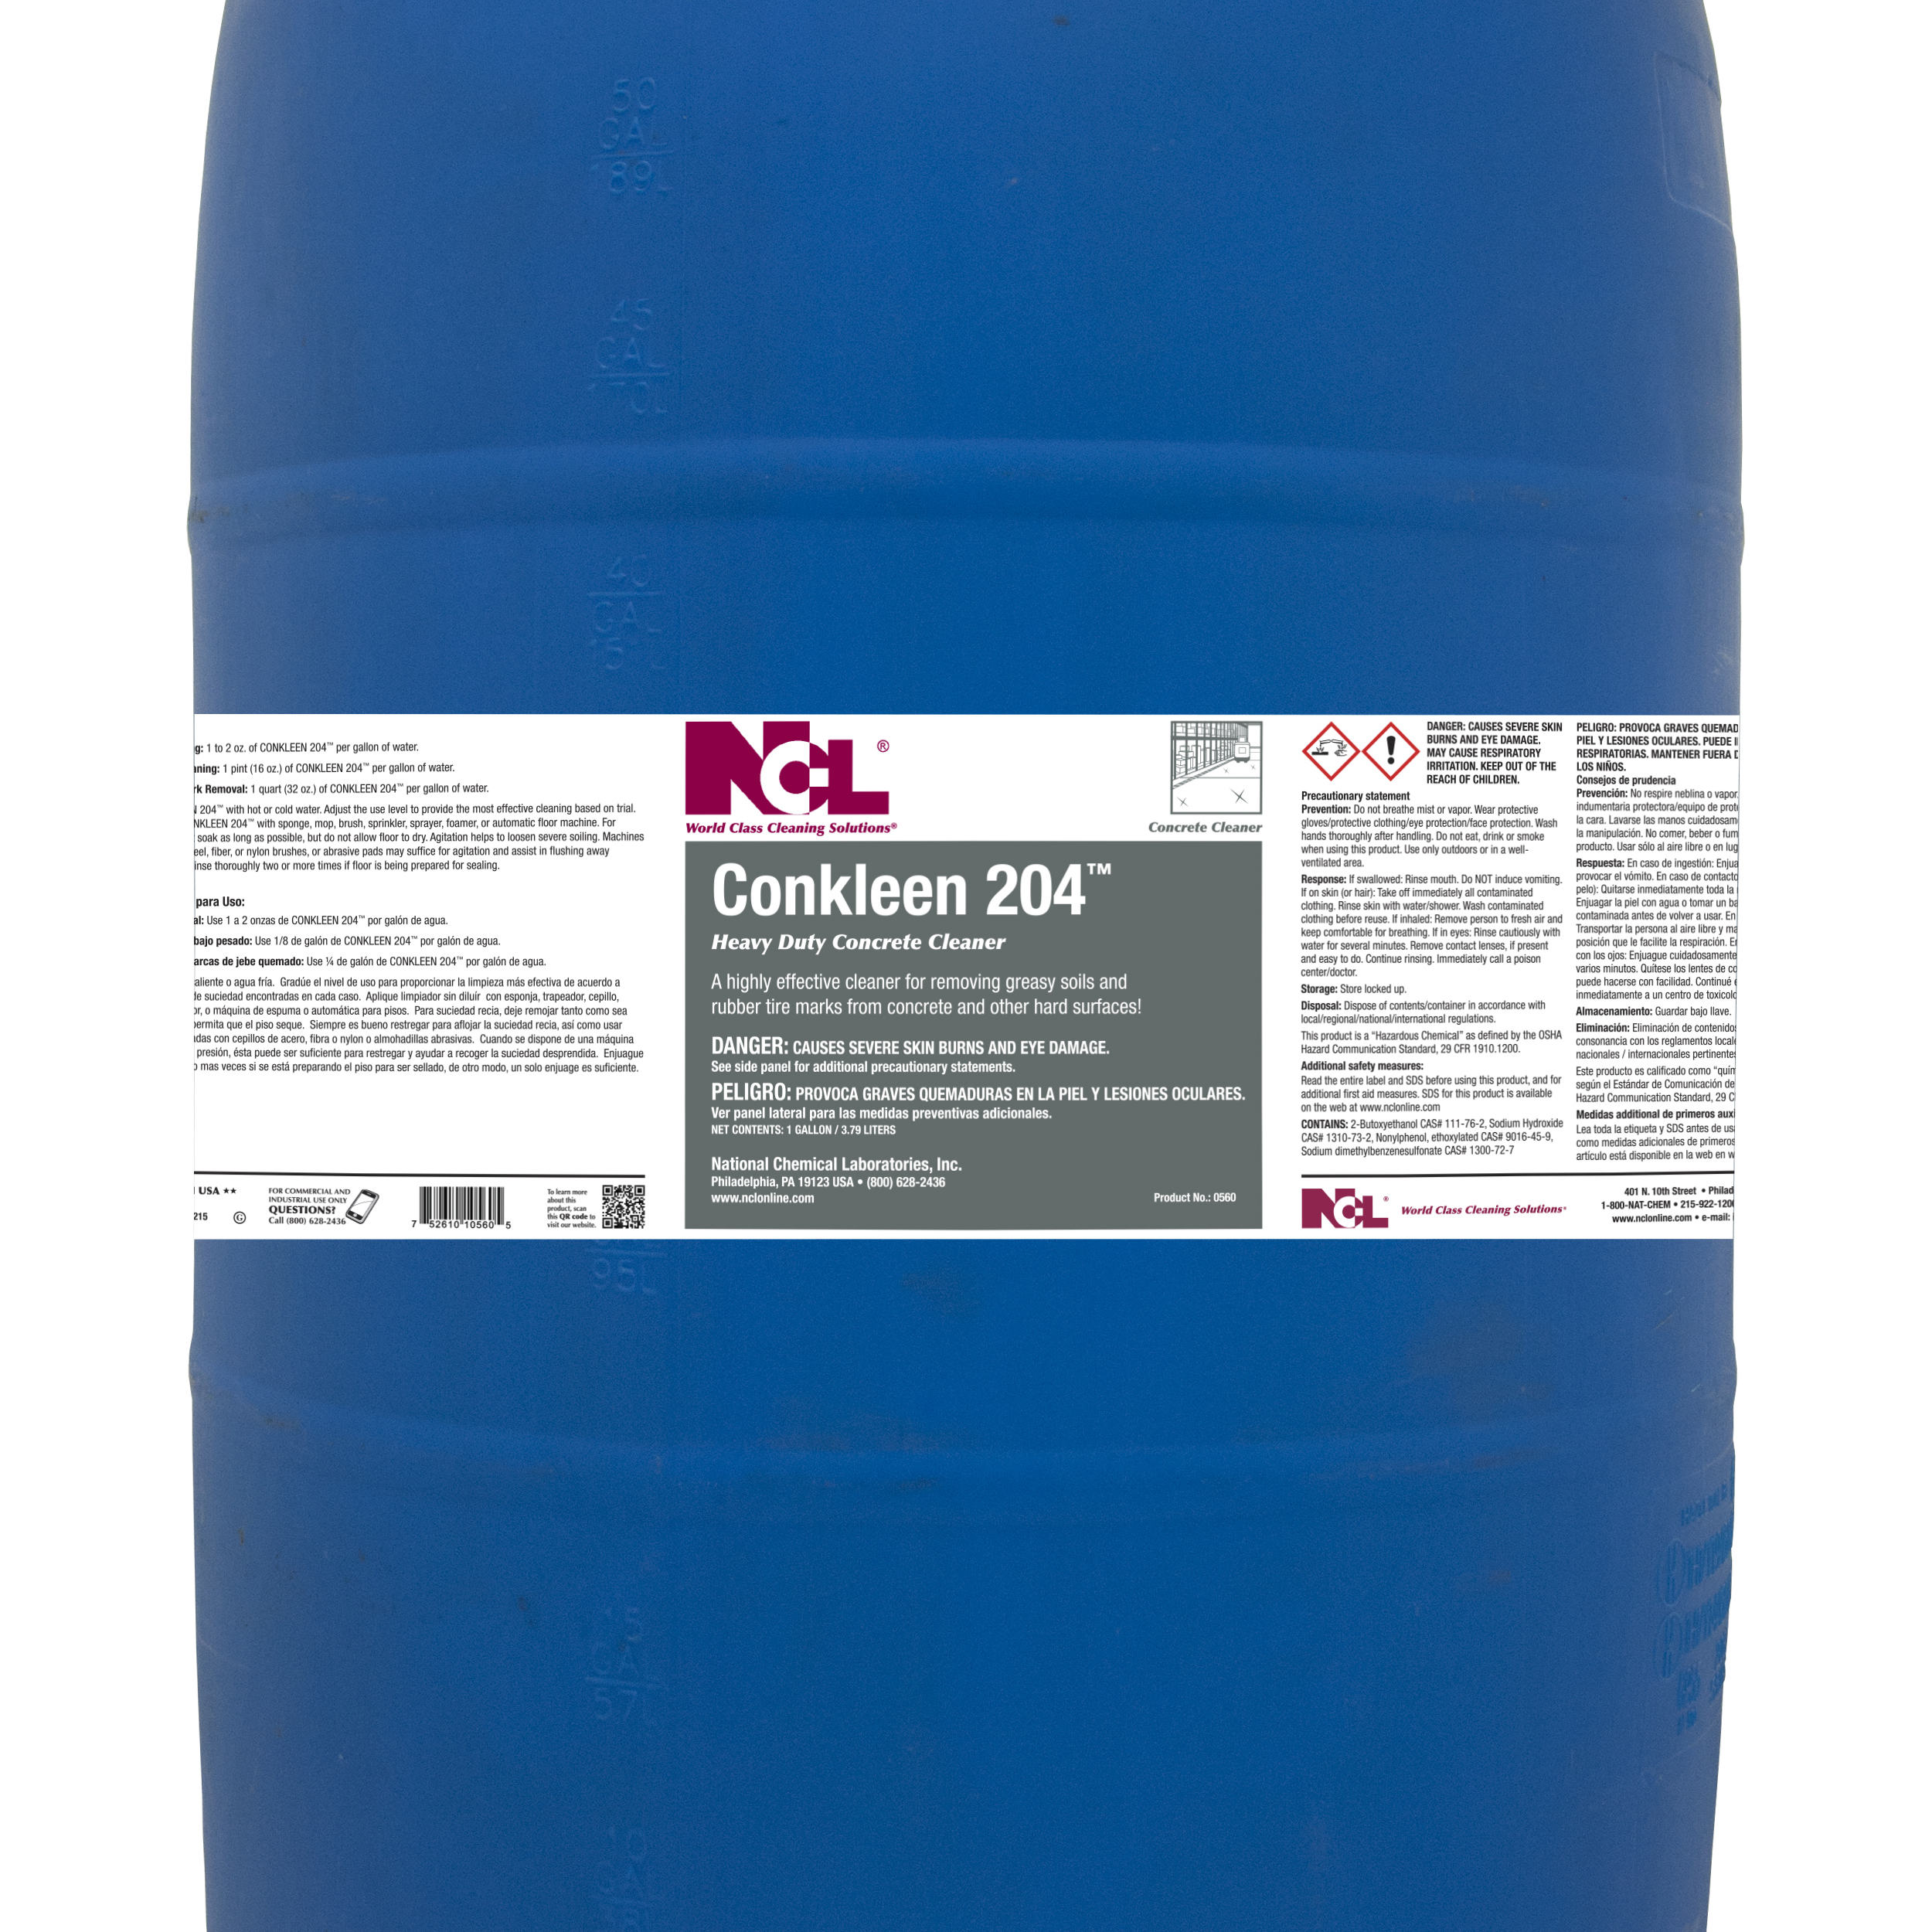  CONKLEEN 204 Heavy Duty Concrete Cleaner 55 Gallon Drum (NCL0560-18) 